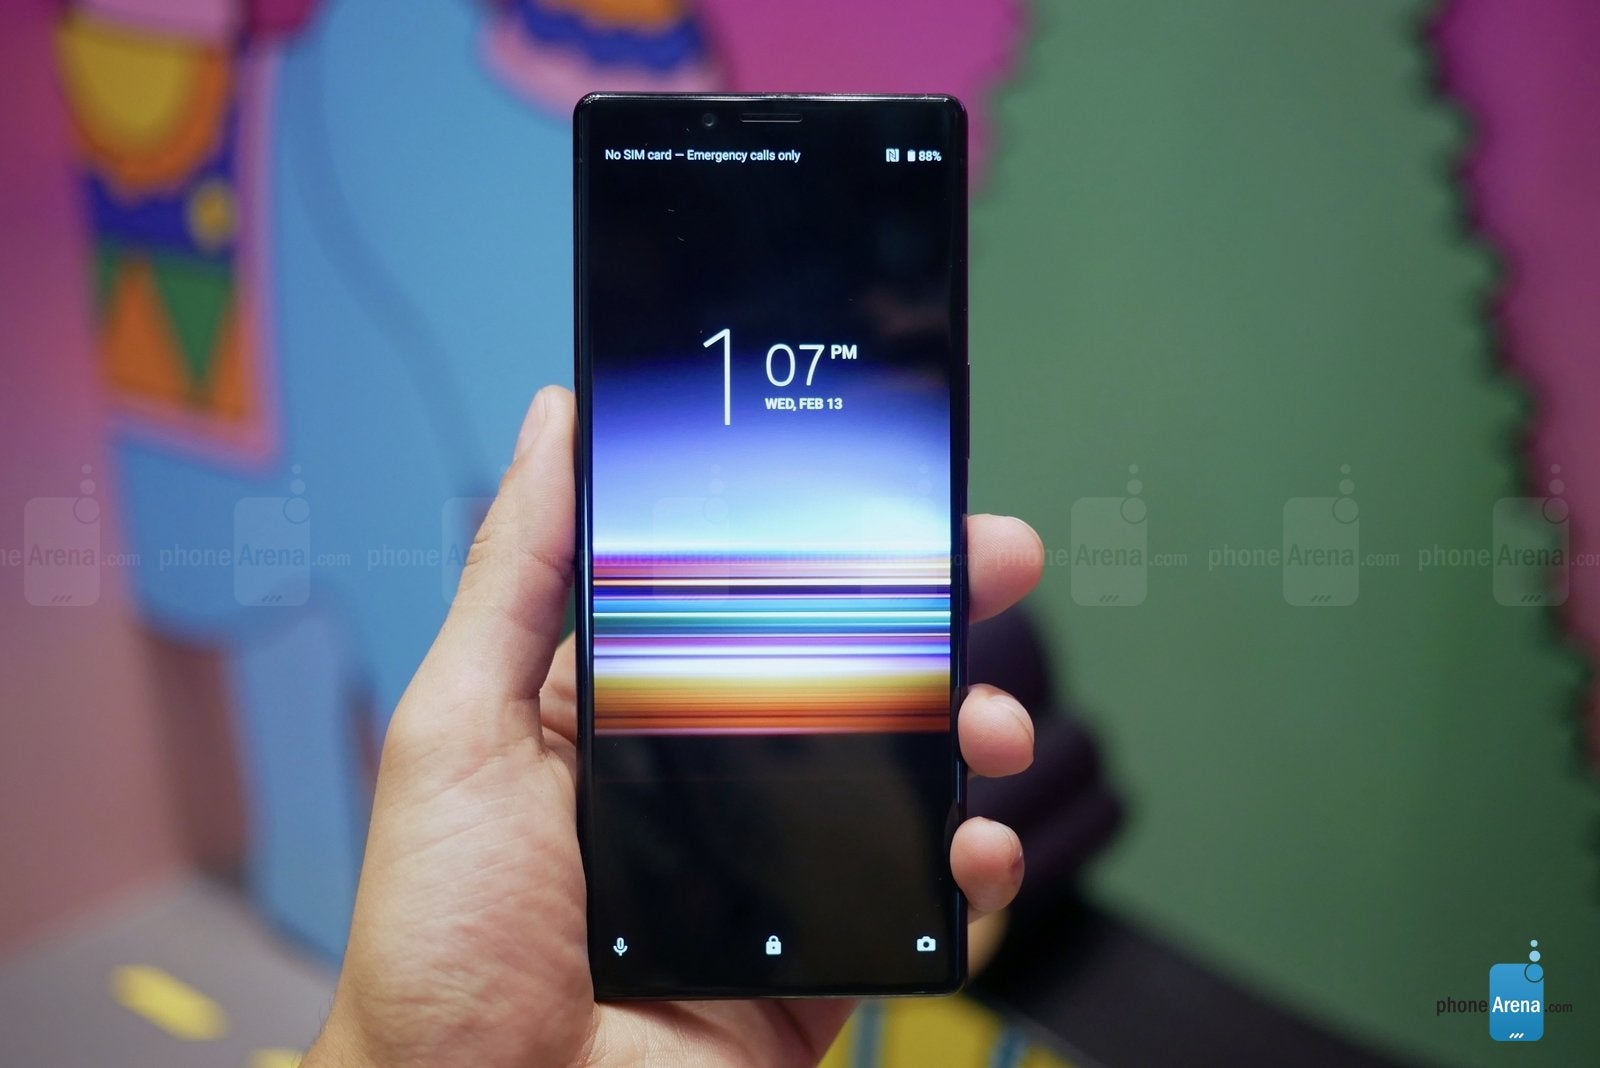 Sony Xperia 1 Hands-On: A tall order of screen with extra cameras